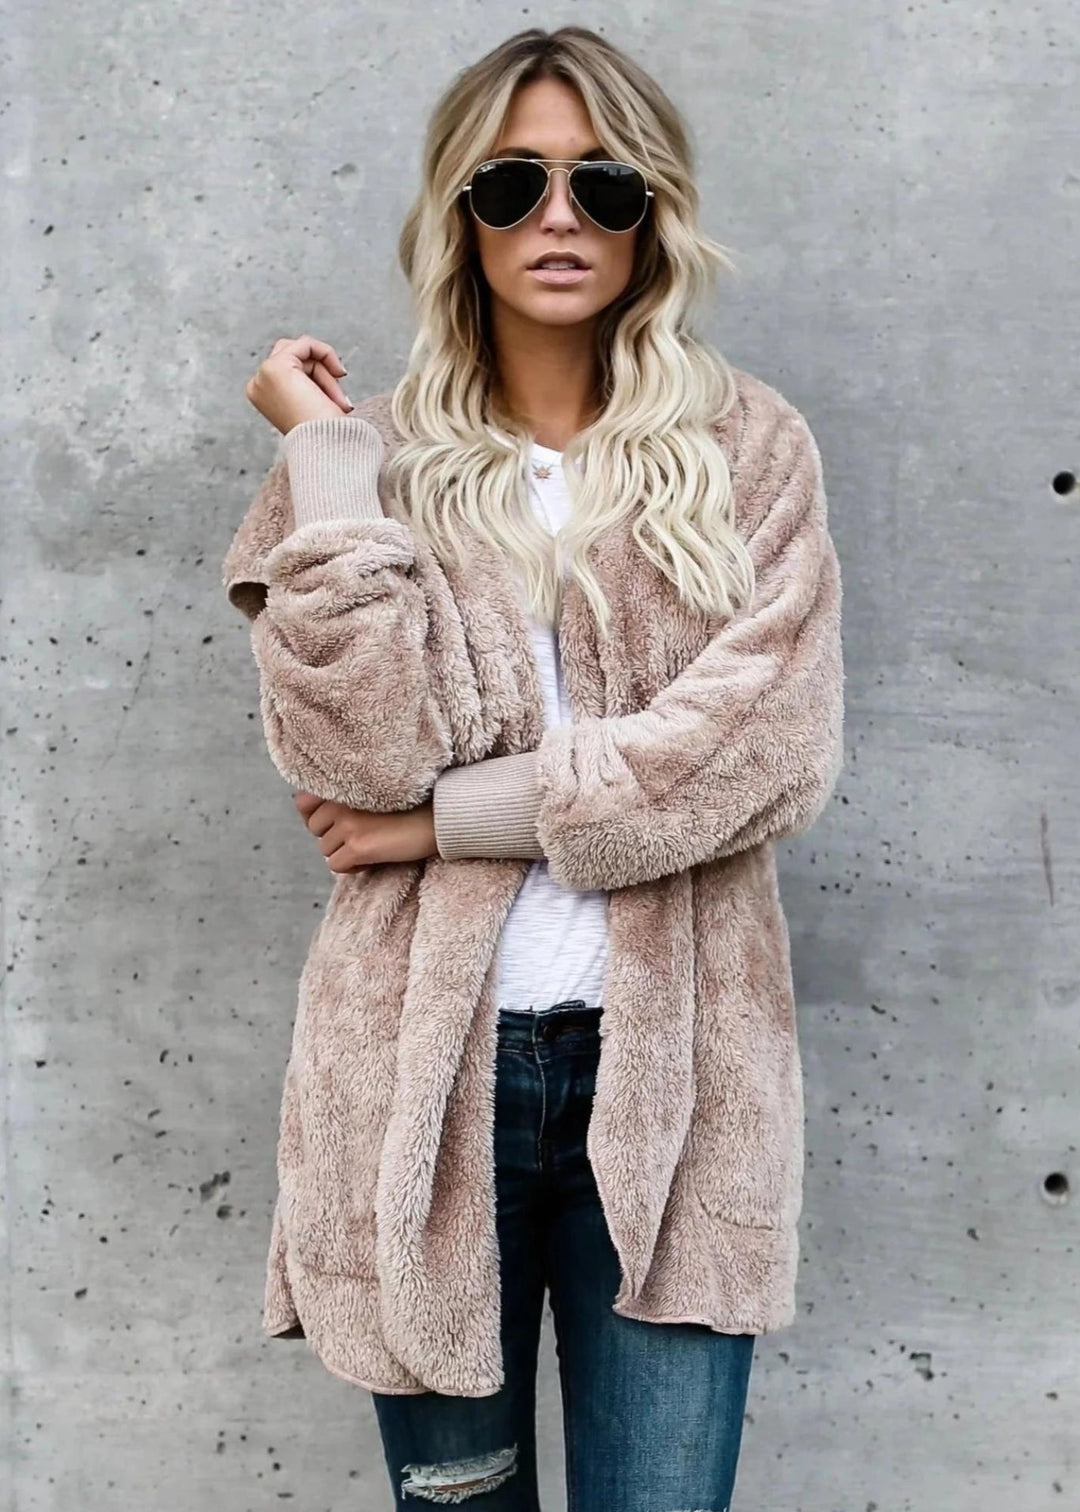 Coziest cardi yet in Taupe by Vibe Apparel